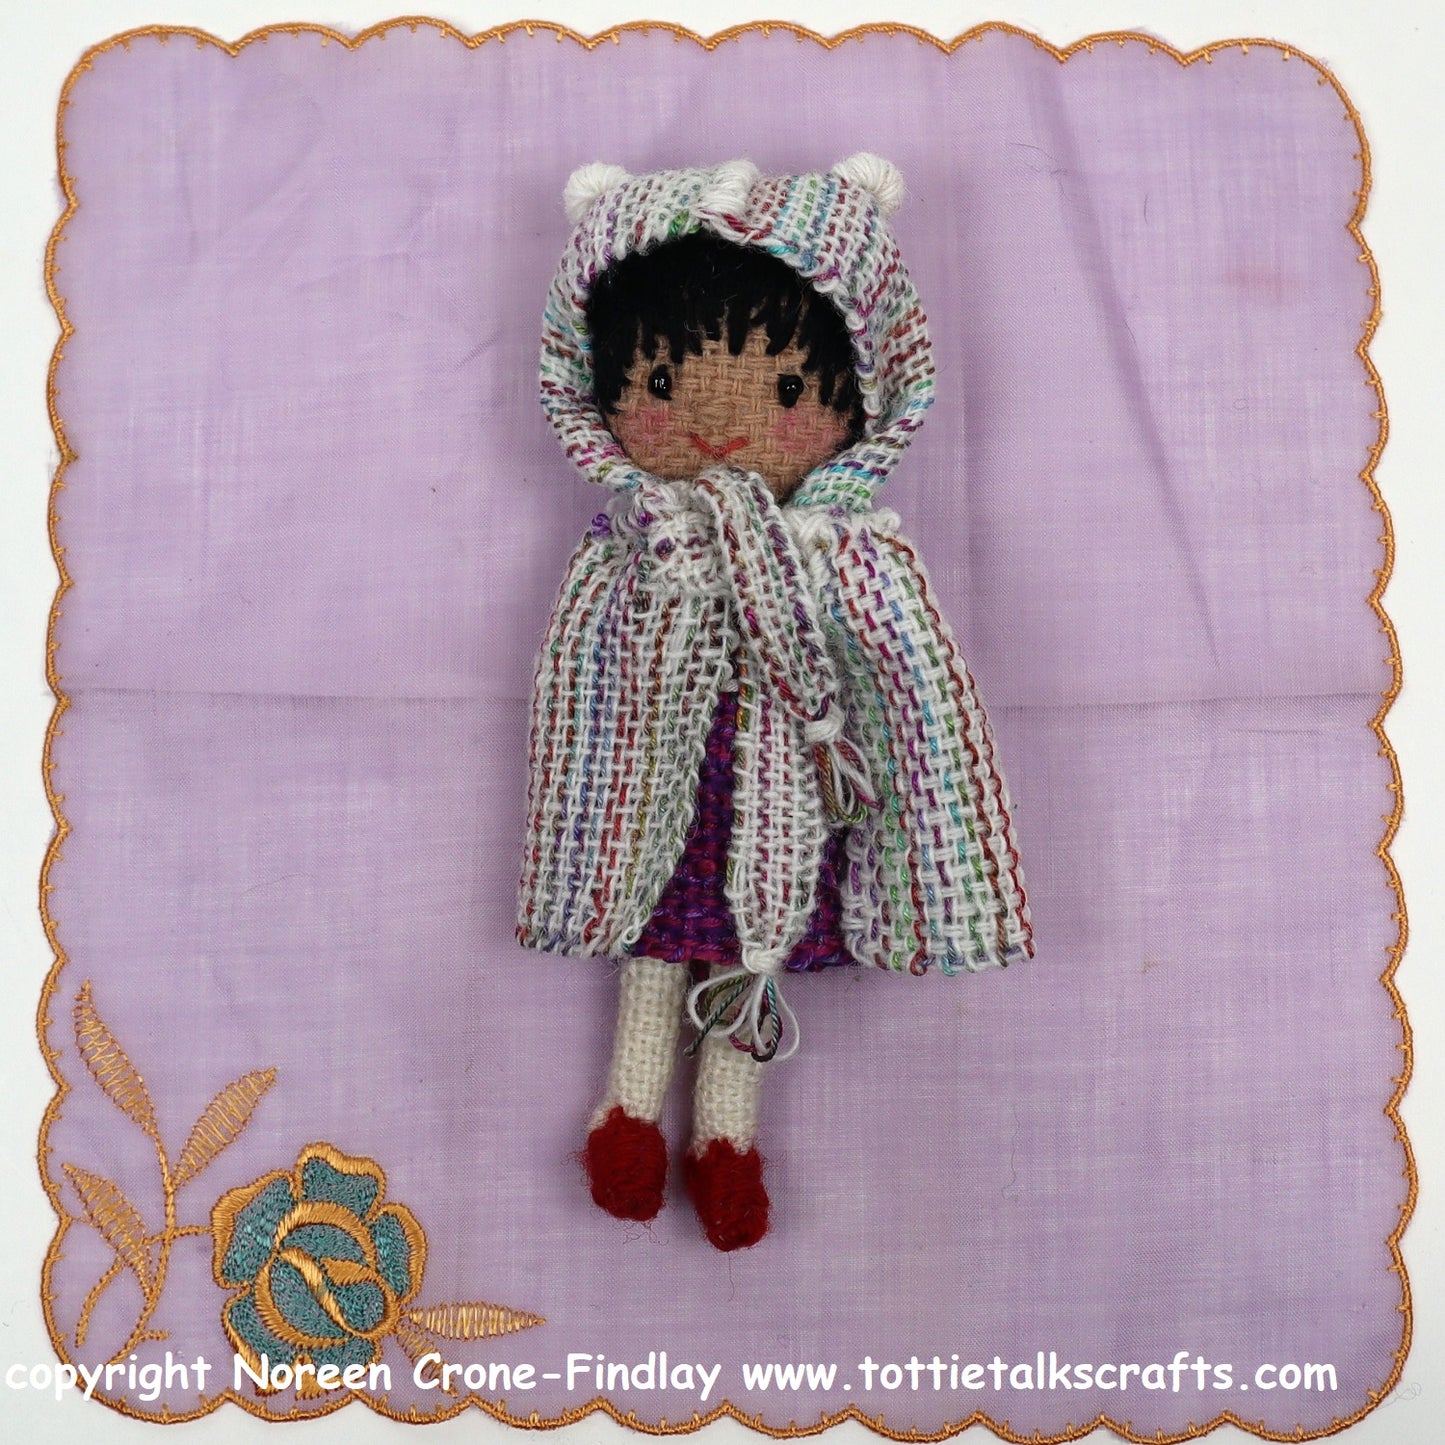 The Lily Doll Hooded Cape Instructional .PDF